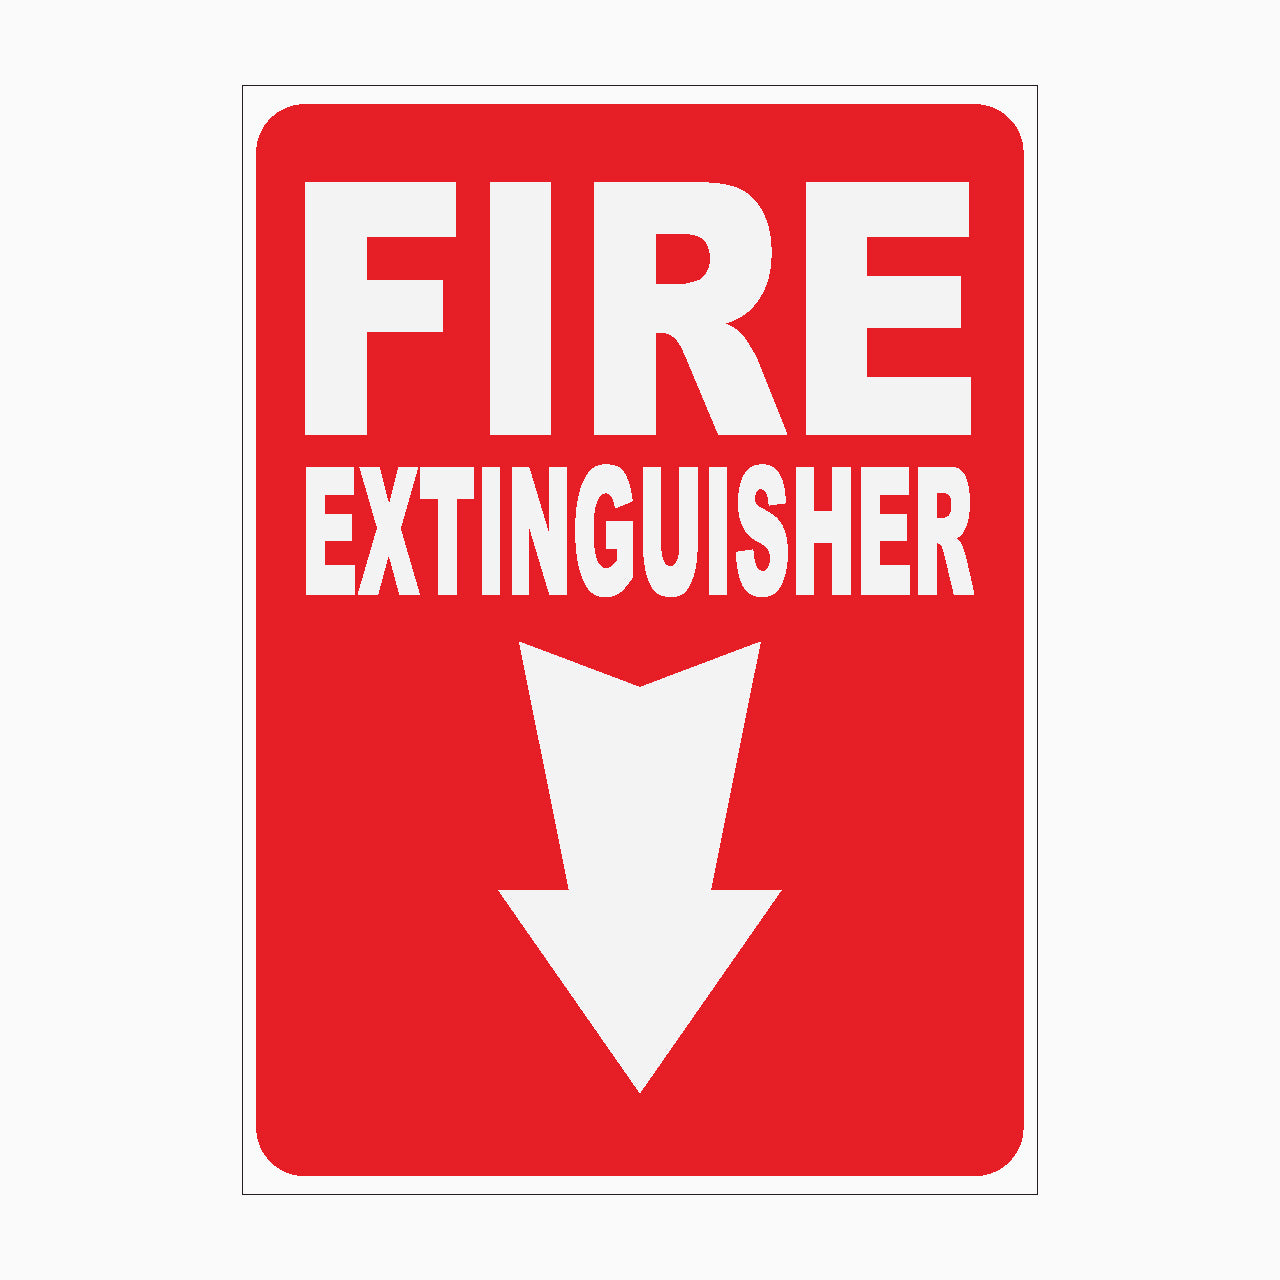 FIRE EXTINGUISHER SIGN - POINT DOWN - BUY ONLINE - GET SIGNS